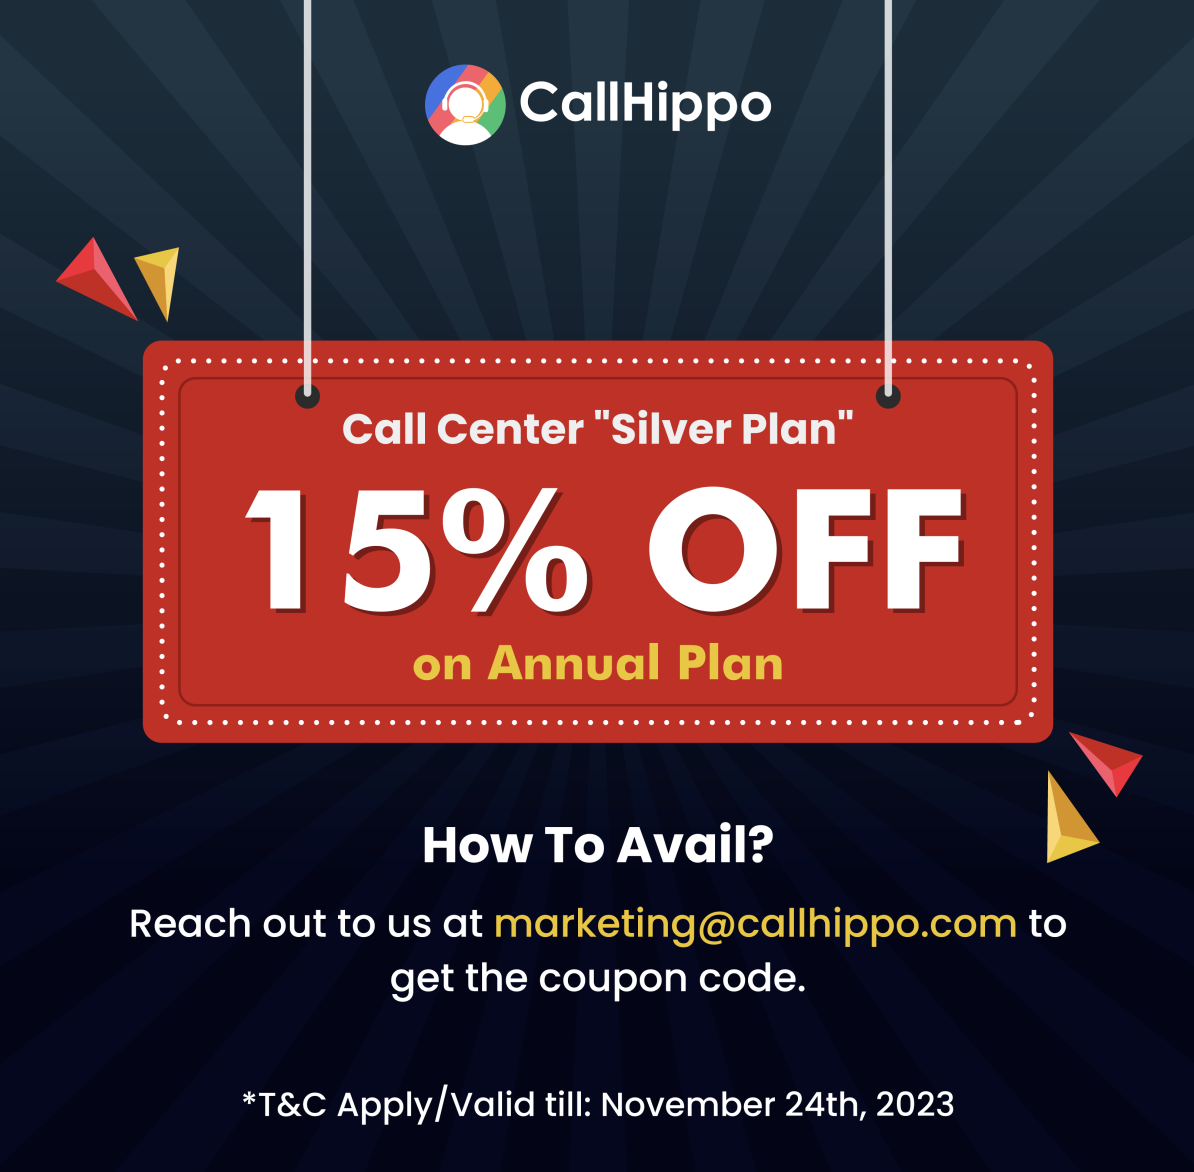 CallHippo's promotional banner for Black Friday 2023